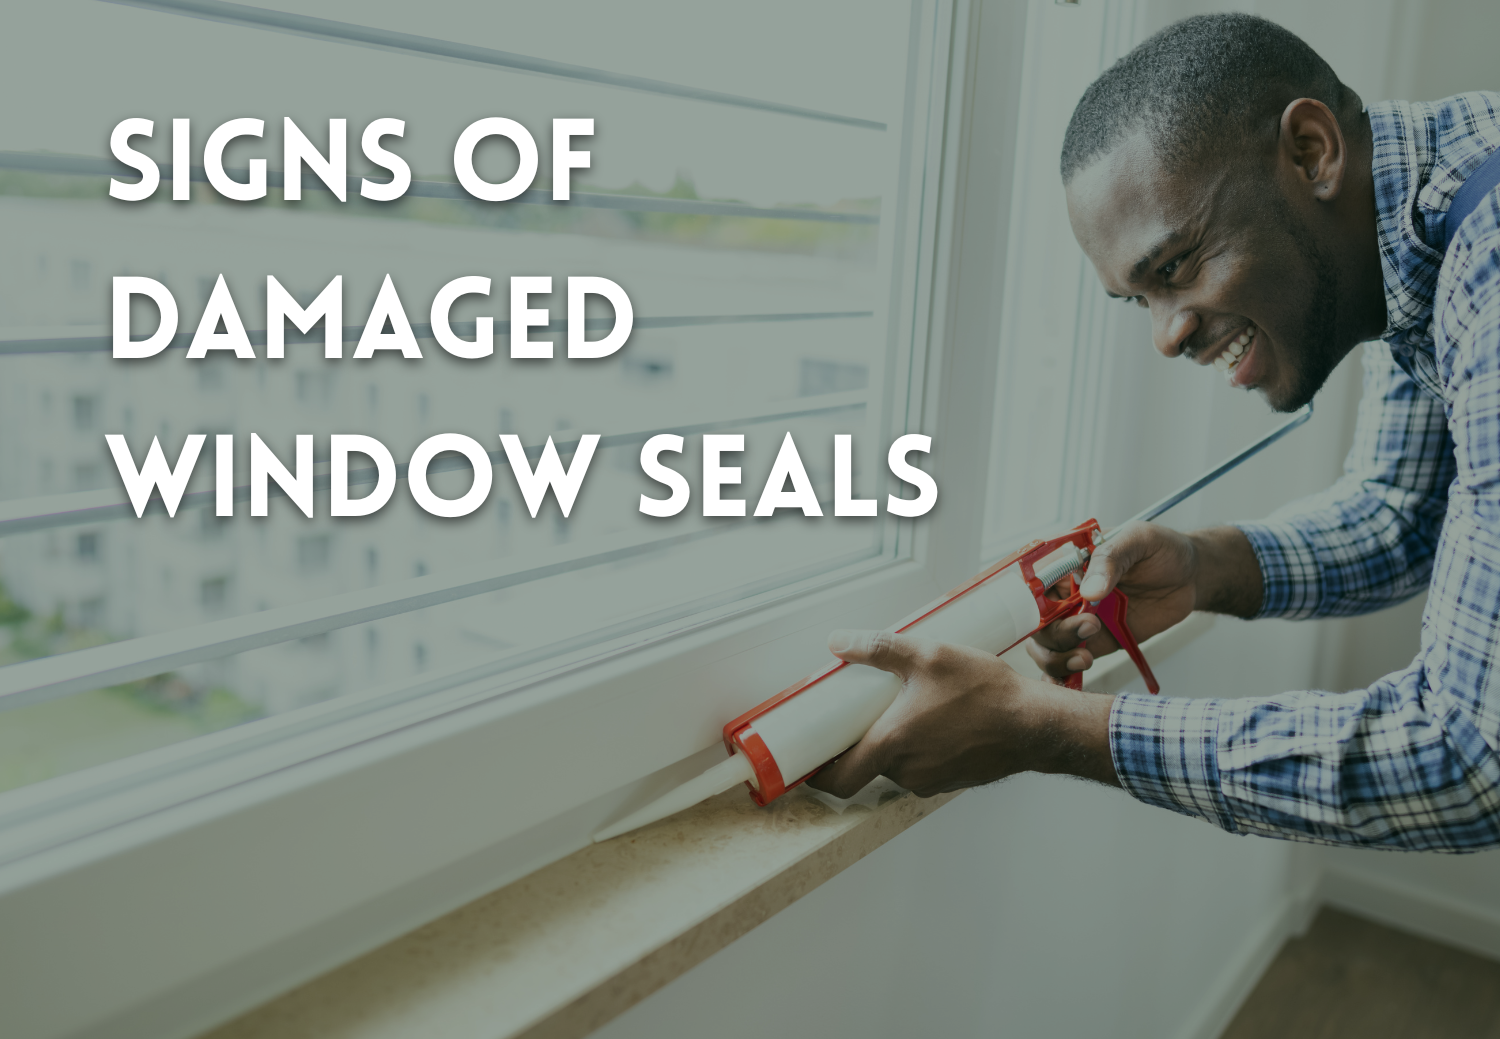 Signs of Damaged Window Seals